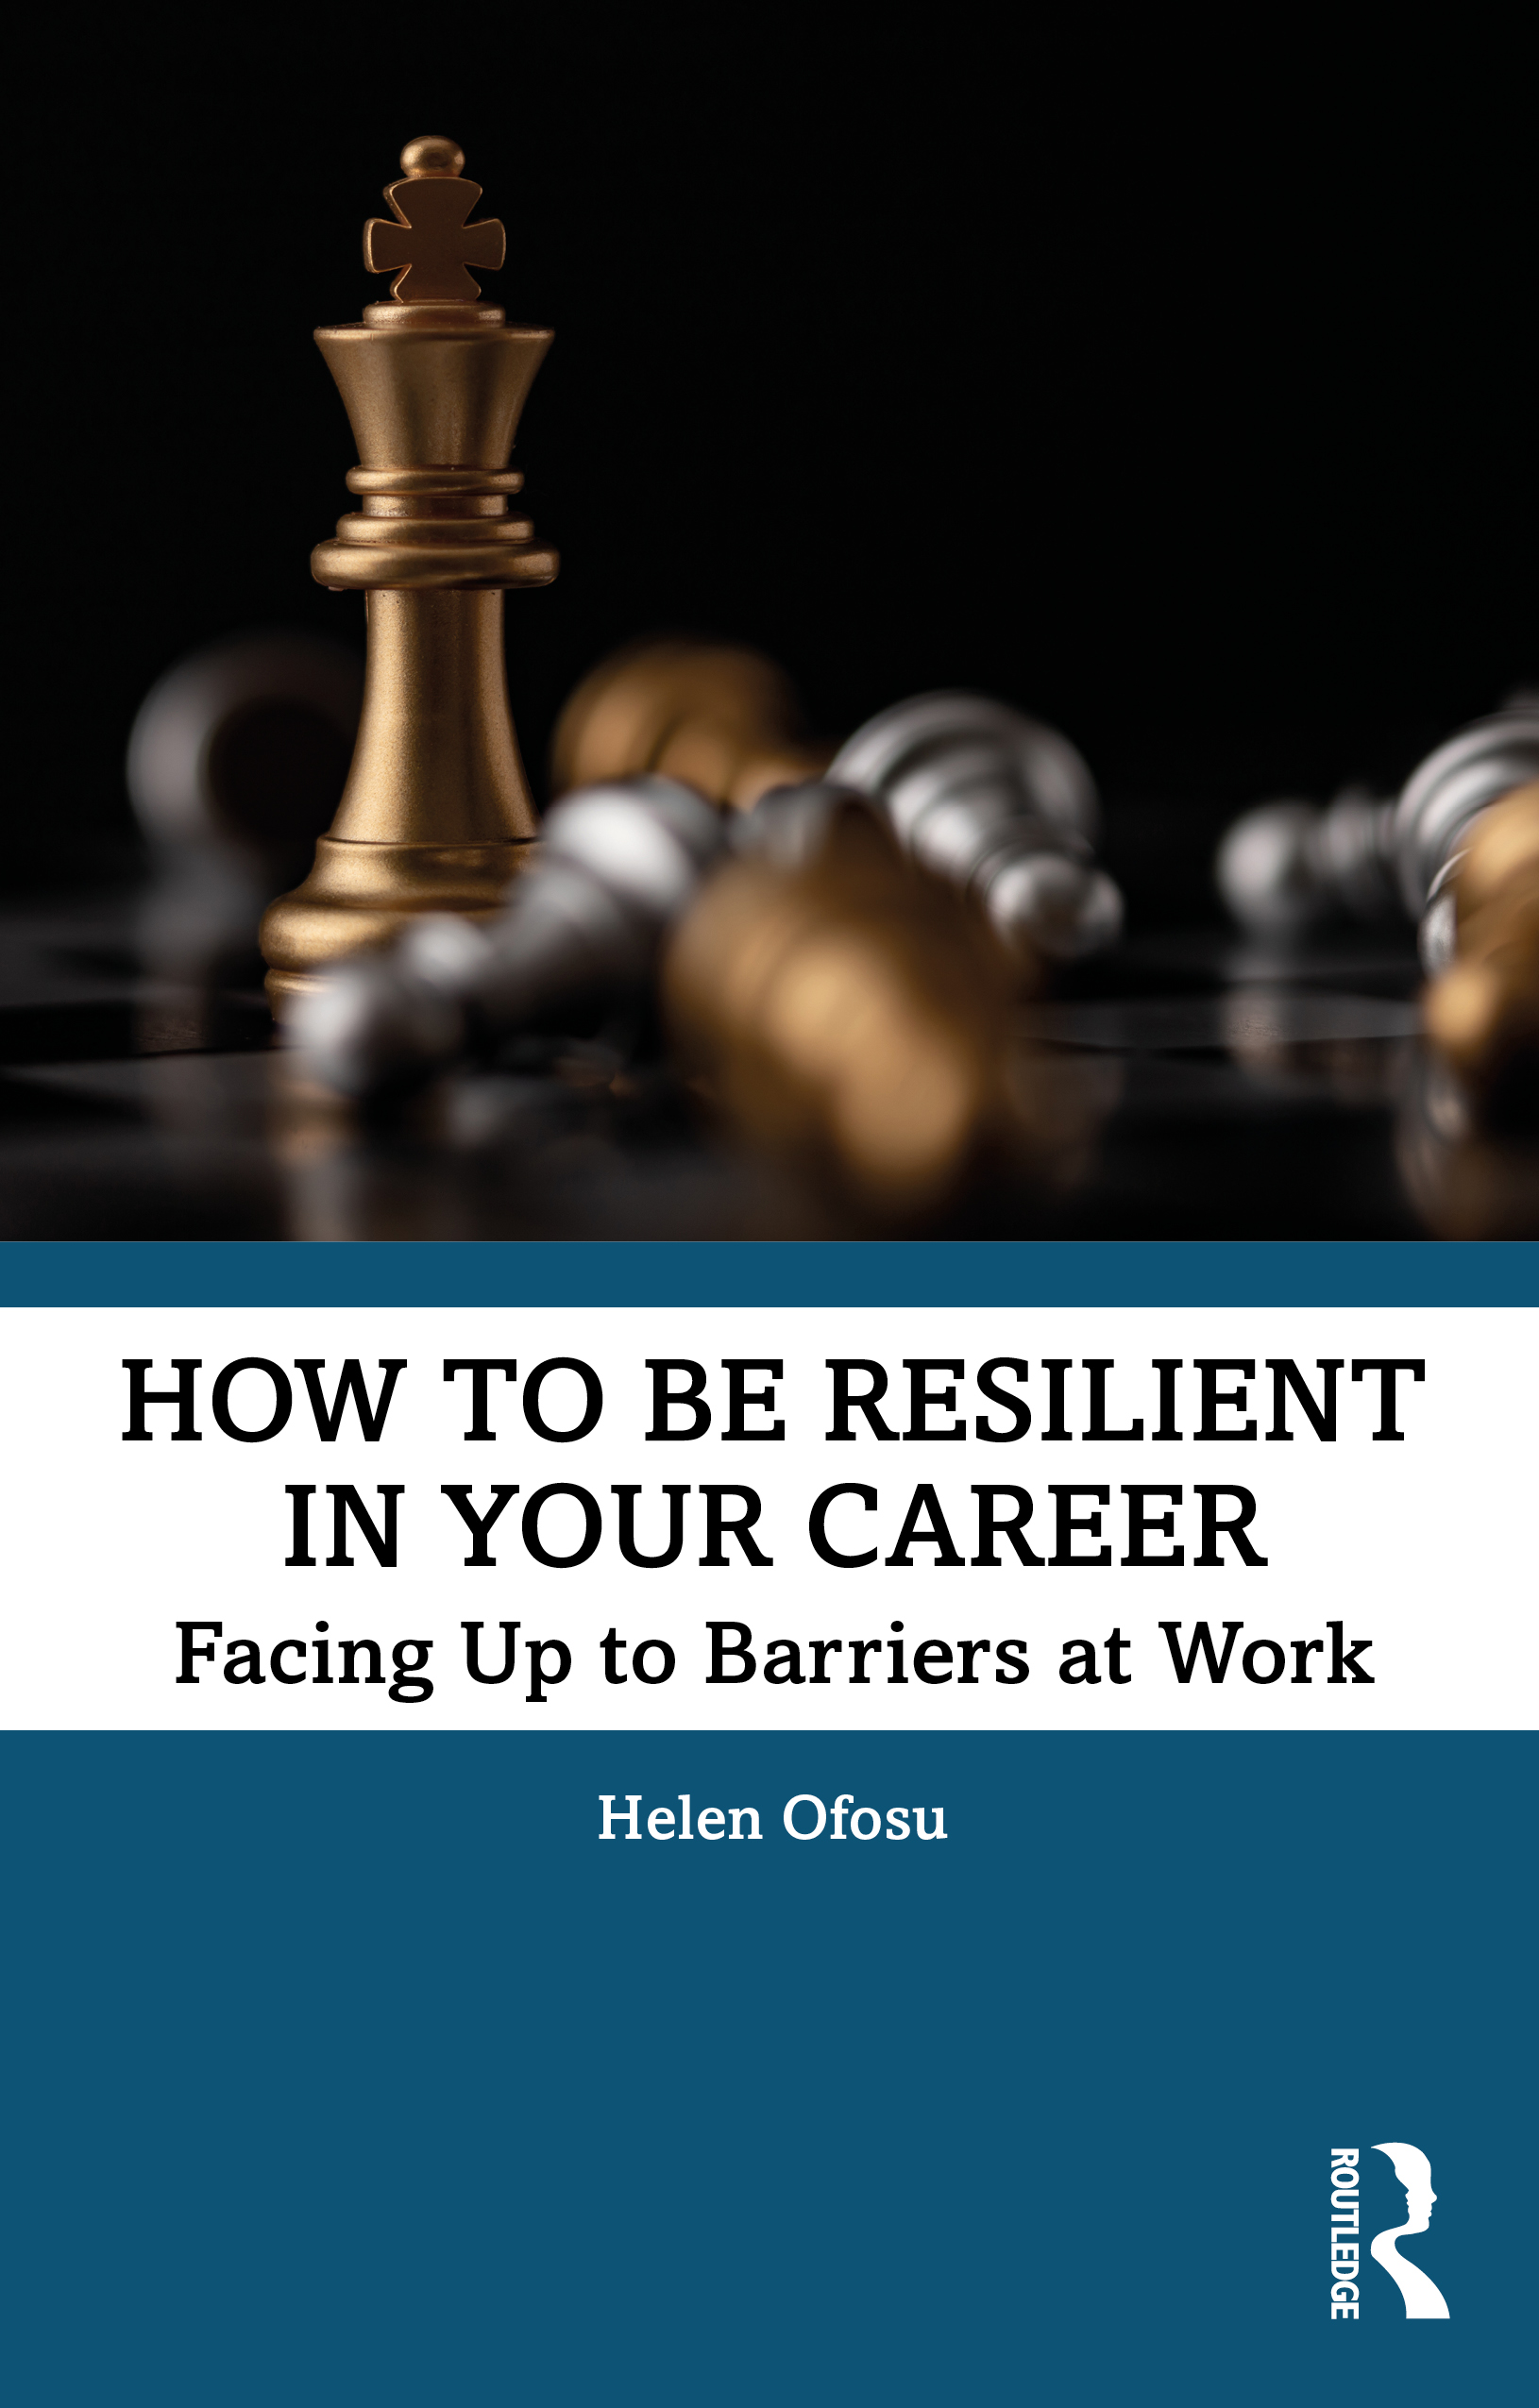 How To Be Resilient In Your Career - Facing Up to Barriers at Work